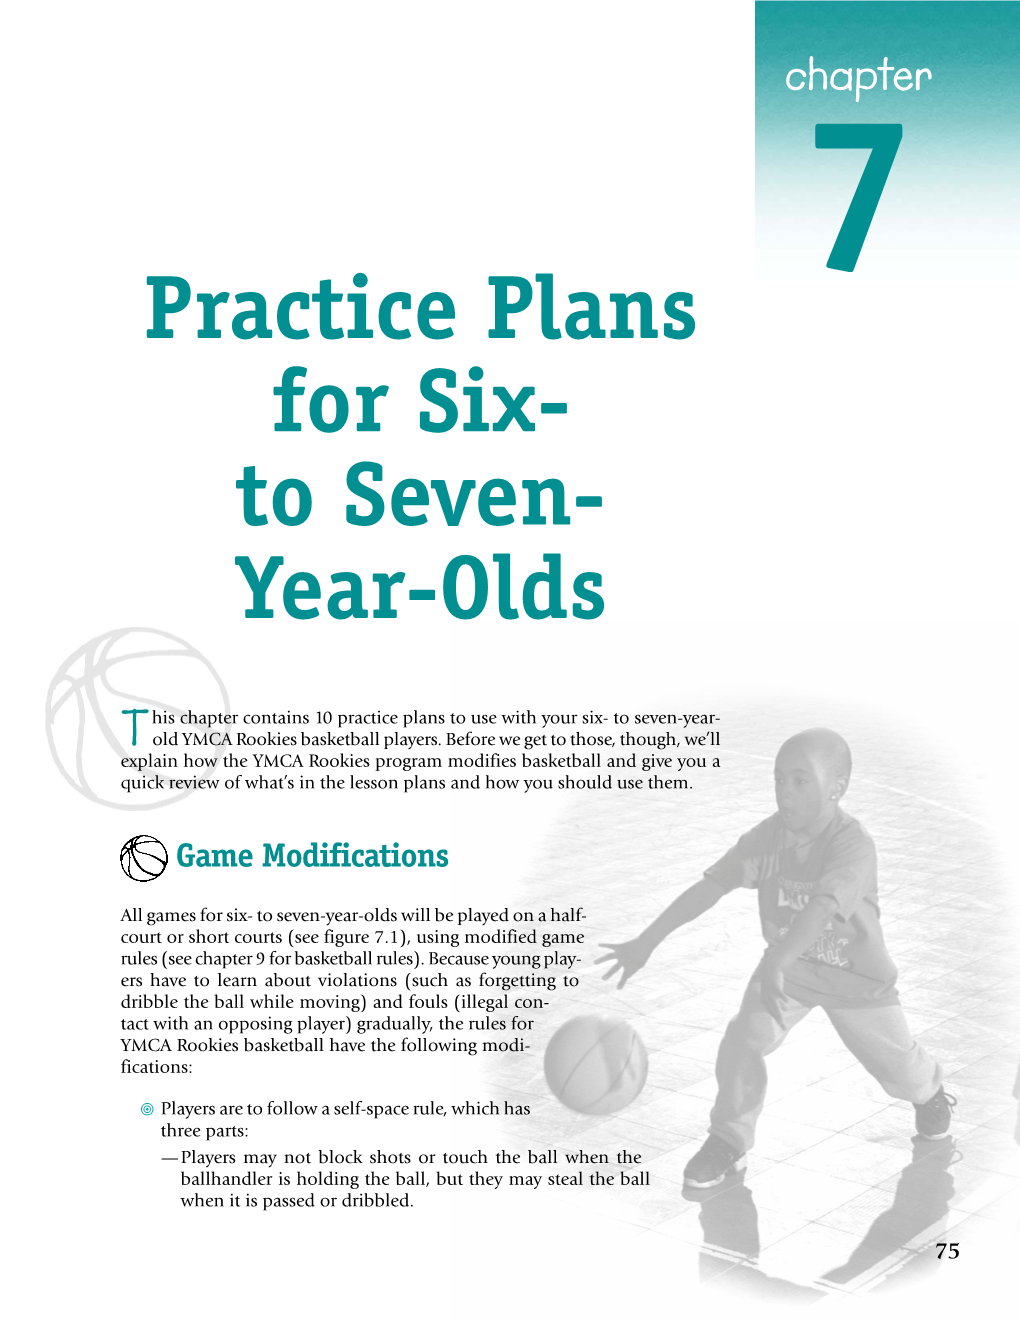 Practice Plans for Six- to Seven- Year-Olds